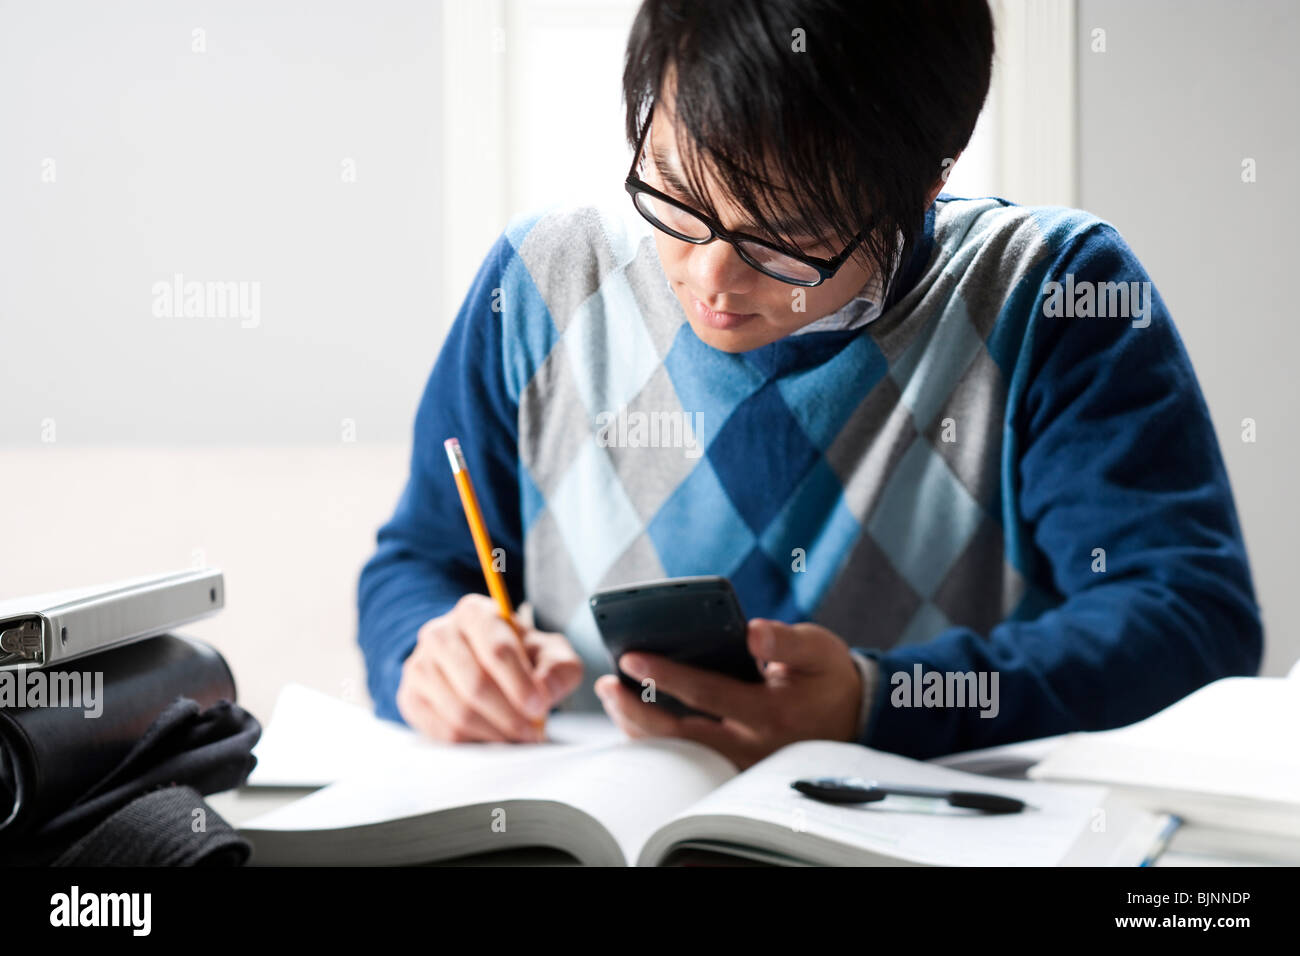 Student concentrating and studying Stock Photo